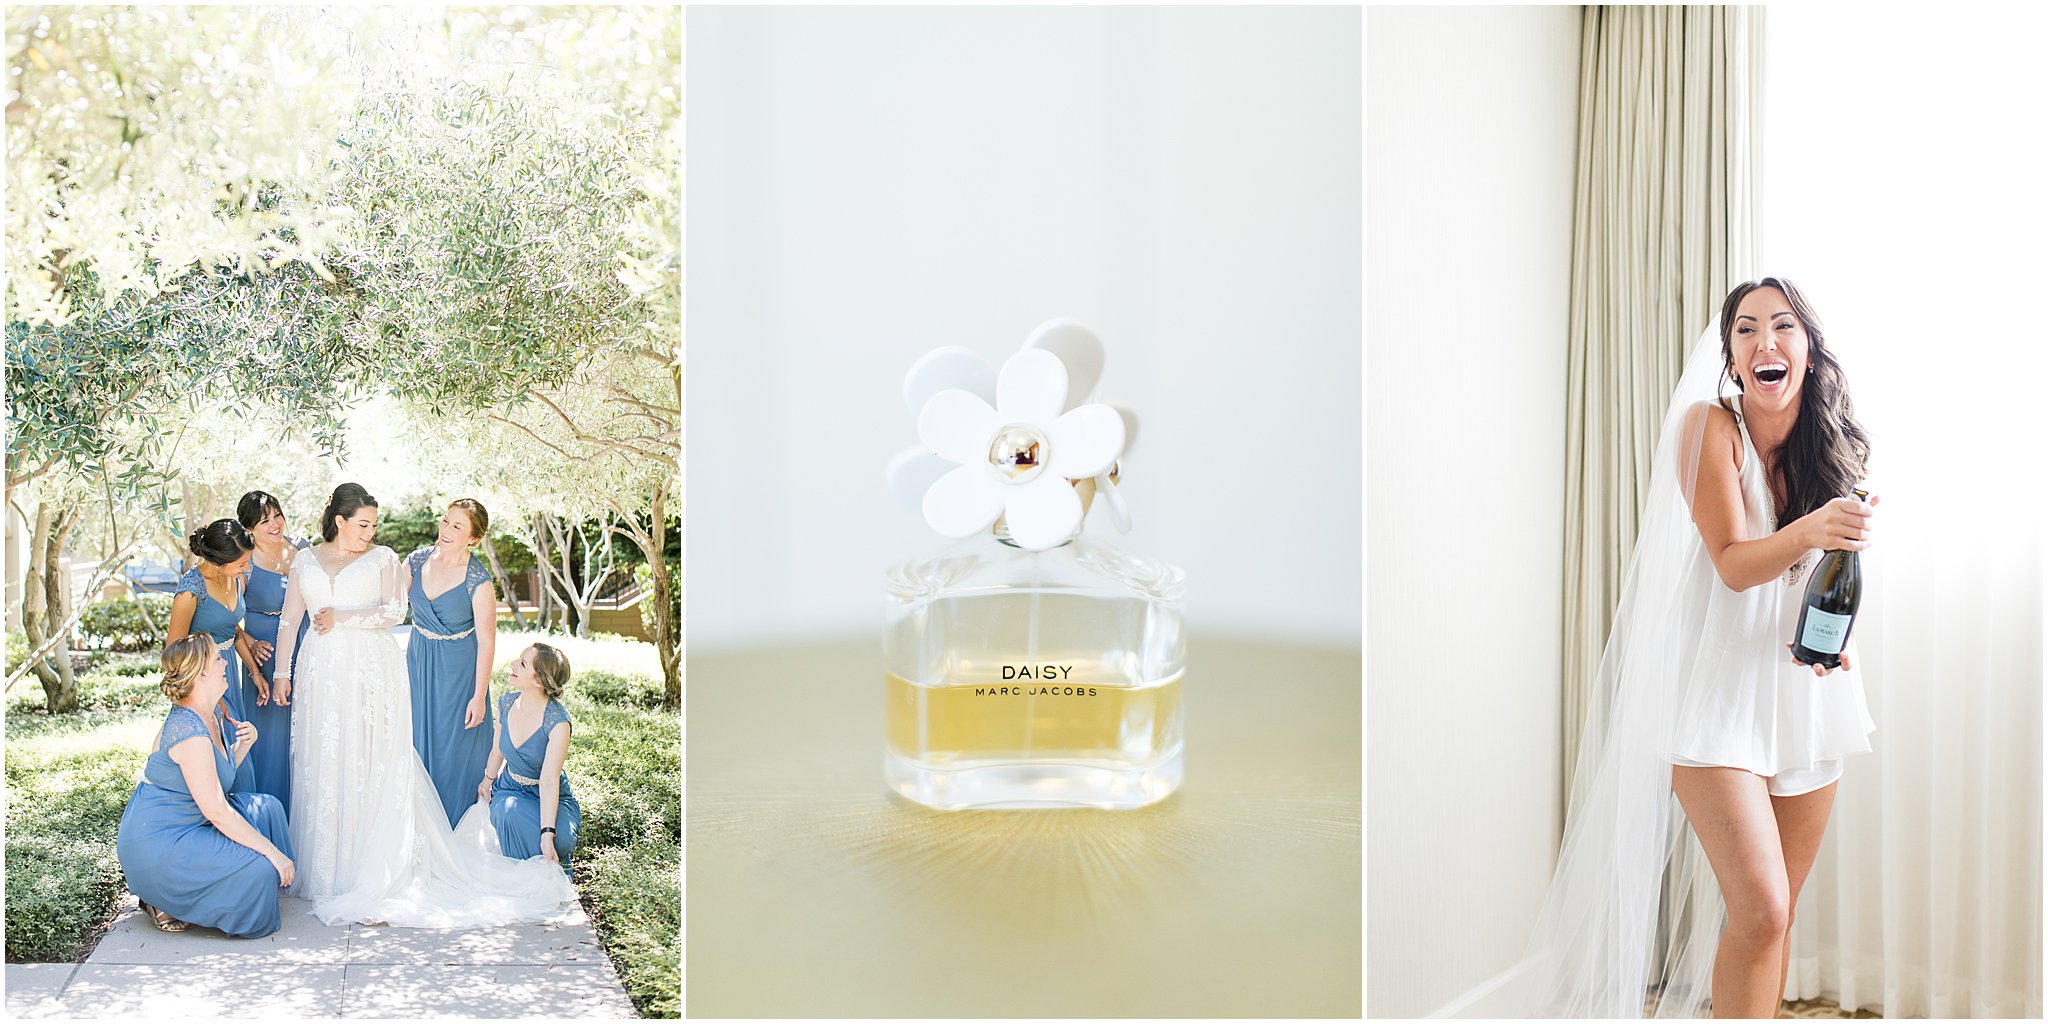 Series of 3 images - left photo of bride surrounded by bridesmaids in a cinderella moment - middle photo of daisy marc jacobs perfume - right photo of bride in getting ready outfit popping champagne